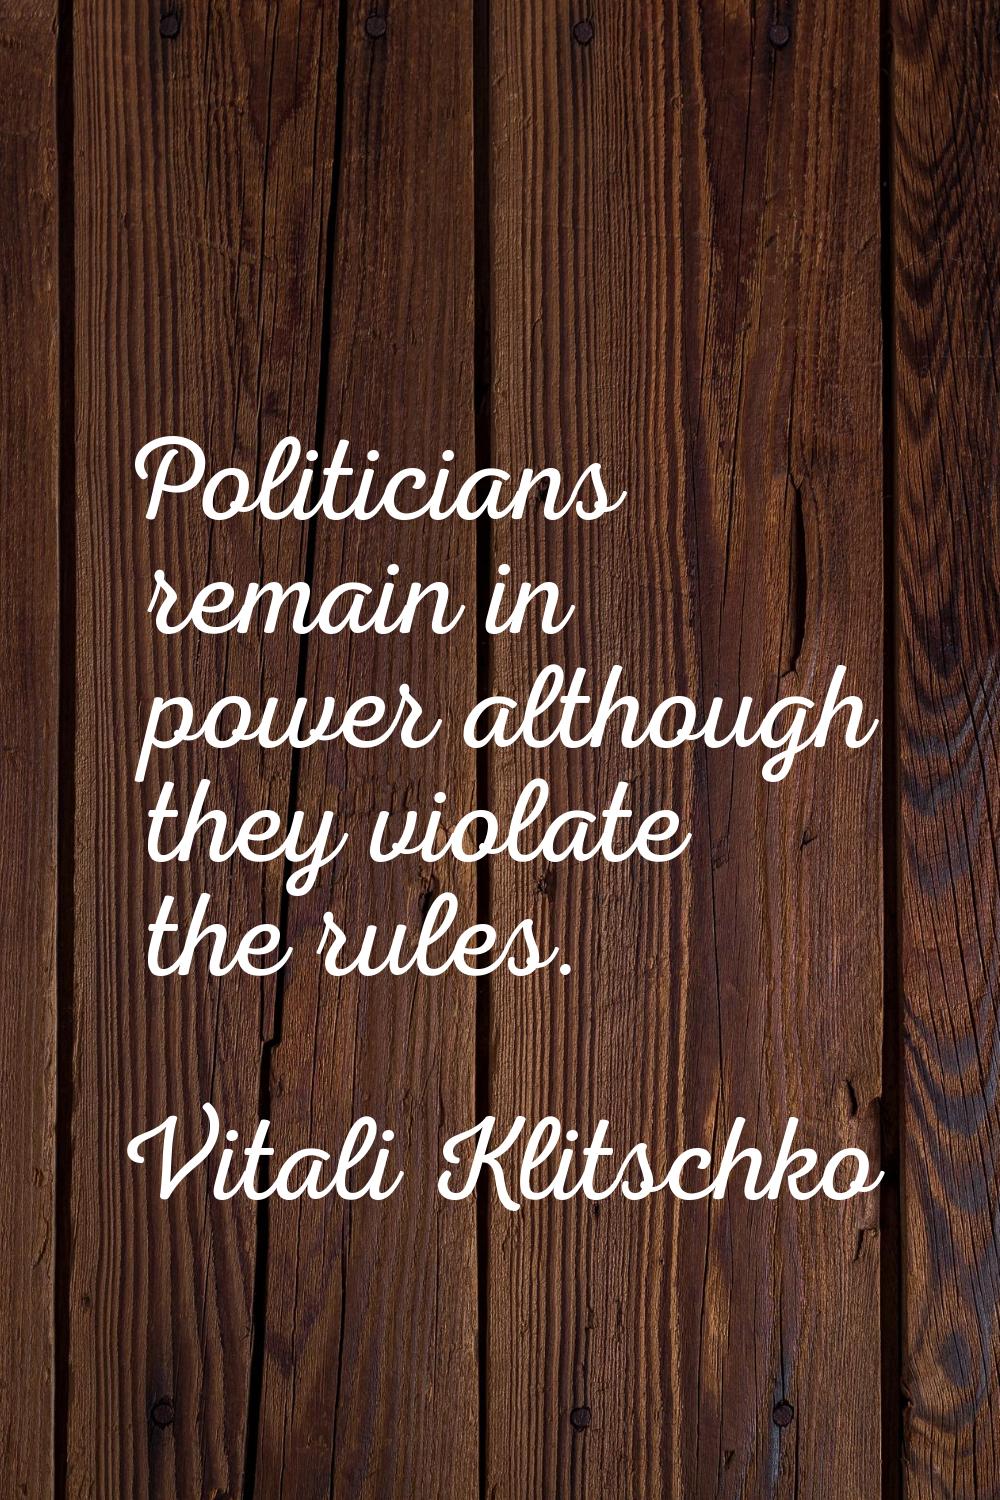 Politicians remain in power although they violate the rules.